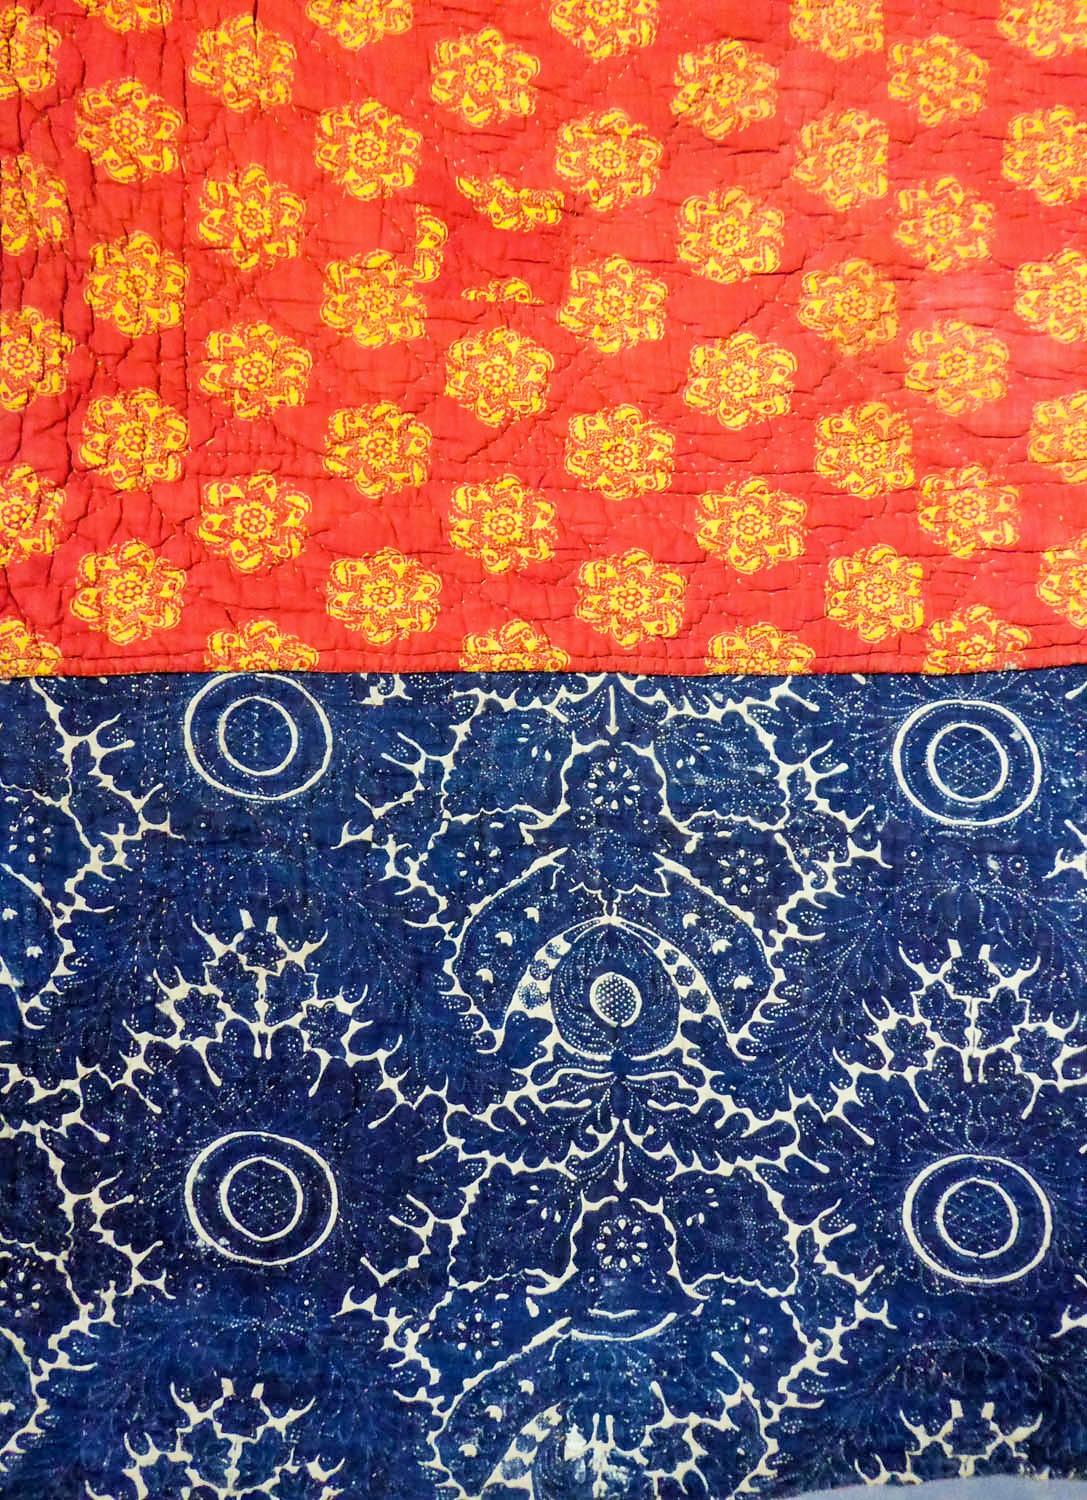 Circa 1800
France - Provence

Large quilt printed with indigo wax by using resist-dying (circa 1780) on one side, and an Indienne with red background and yellow starry wheels from the Napoleonic period (circa 1805) on the other side. Rustic